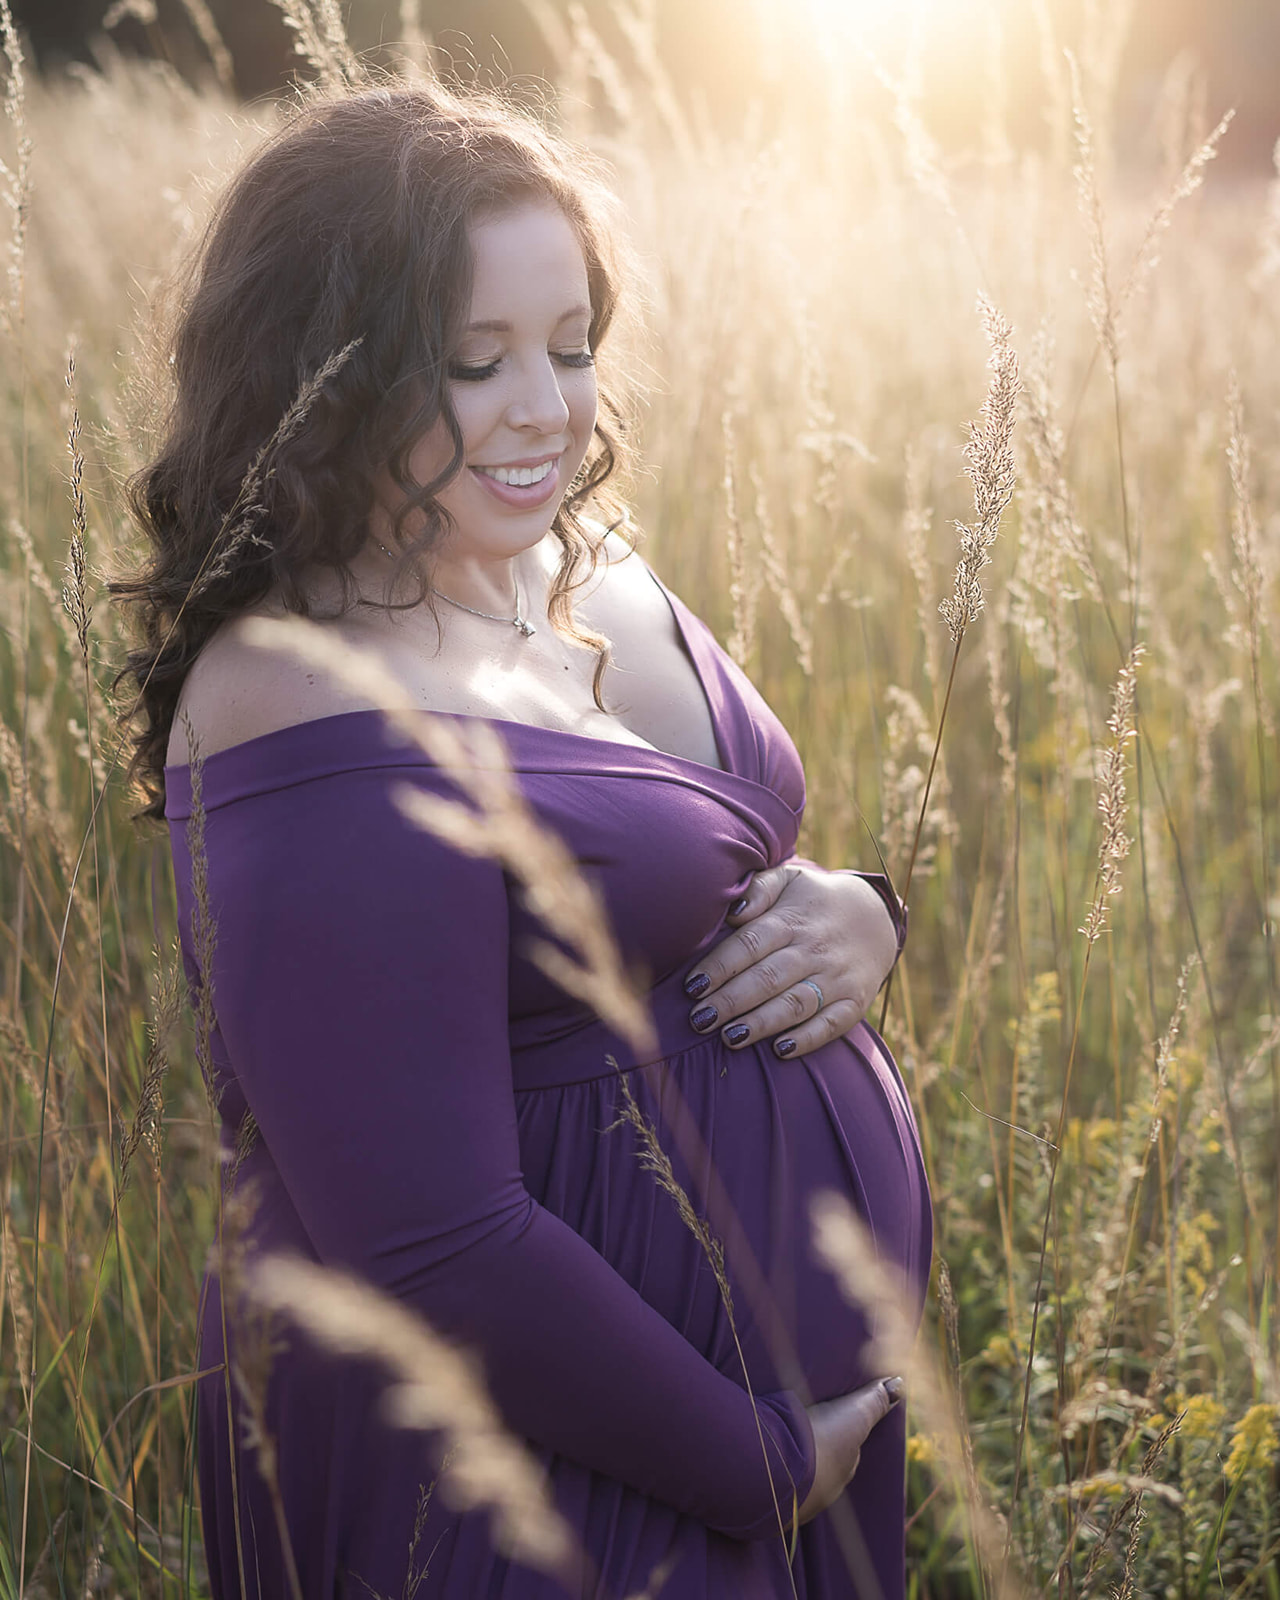 prenatal massage in akron oh in blog photo of pregnant woman in blue dress